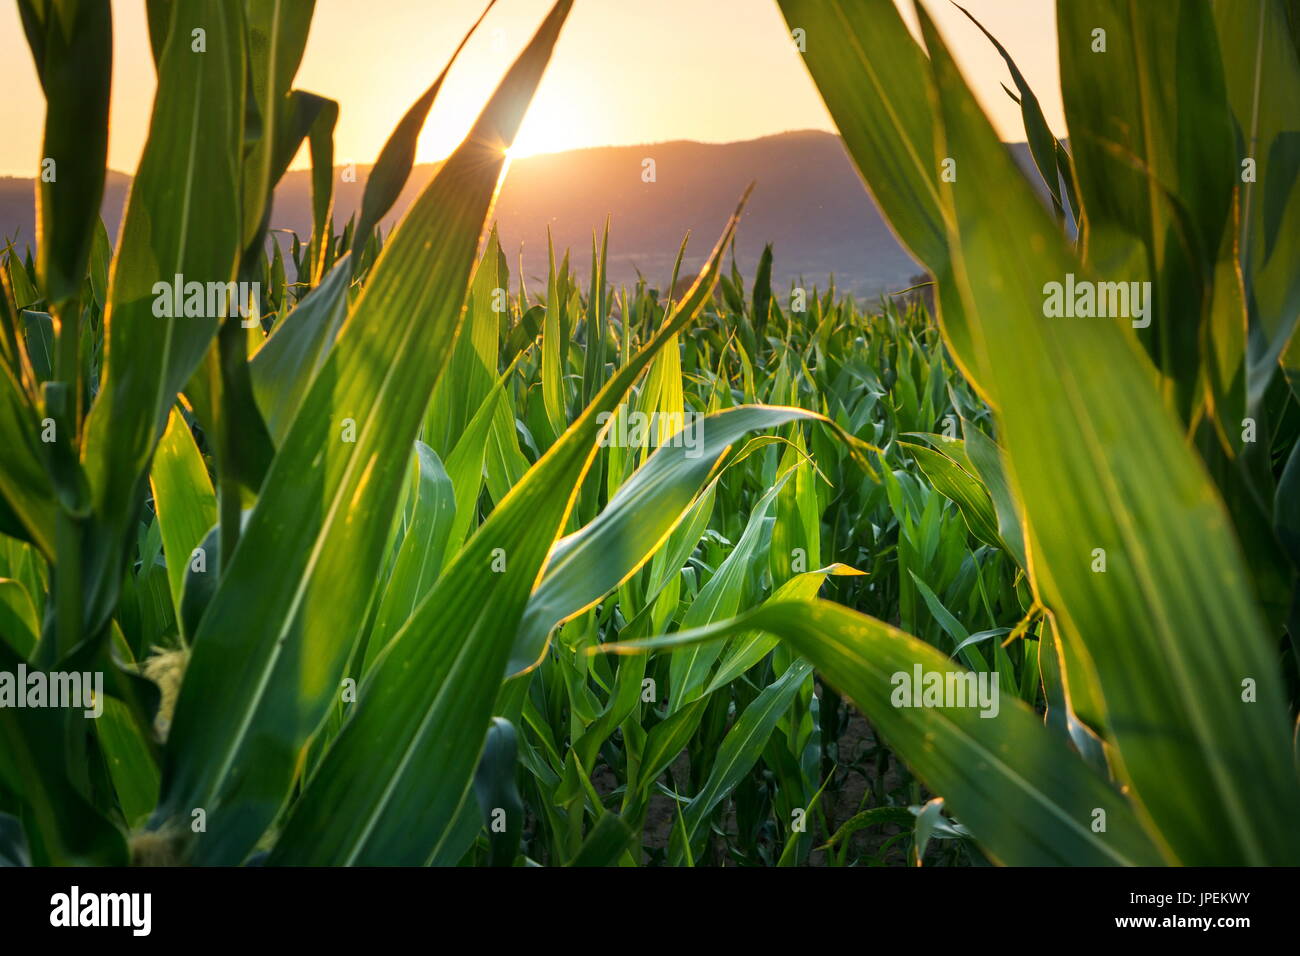 Sunset view through a young corn plantation Stock Photo